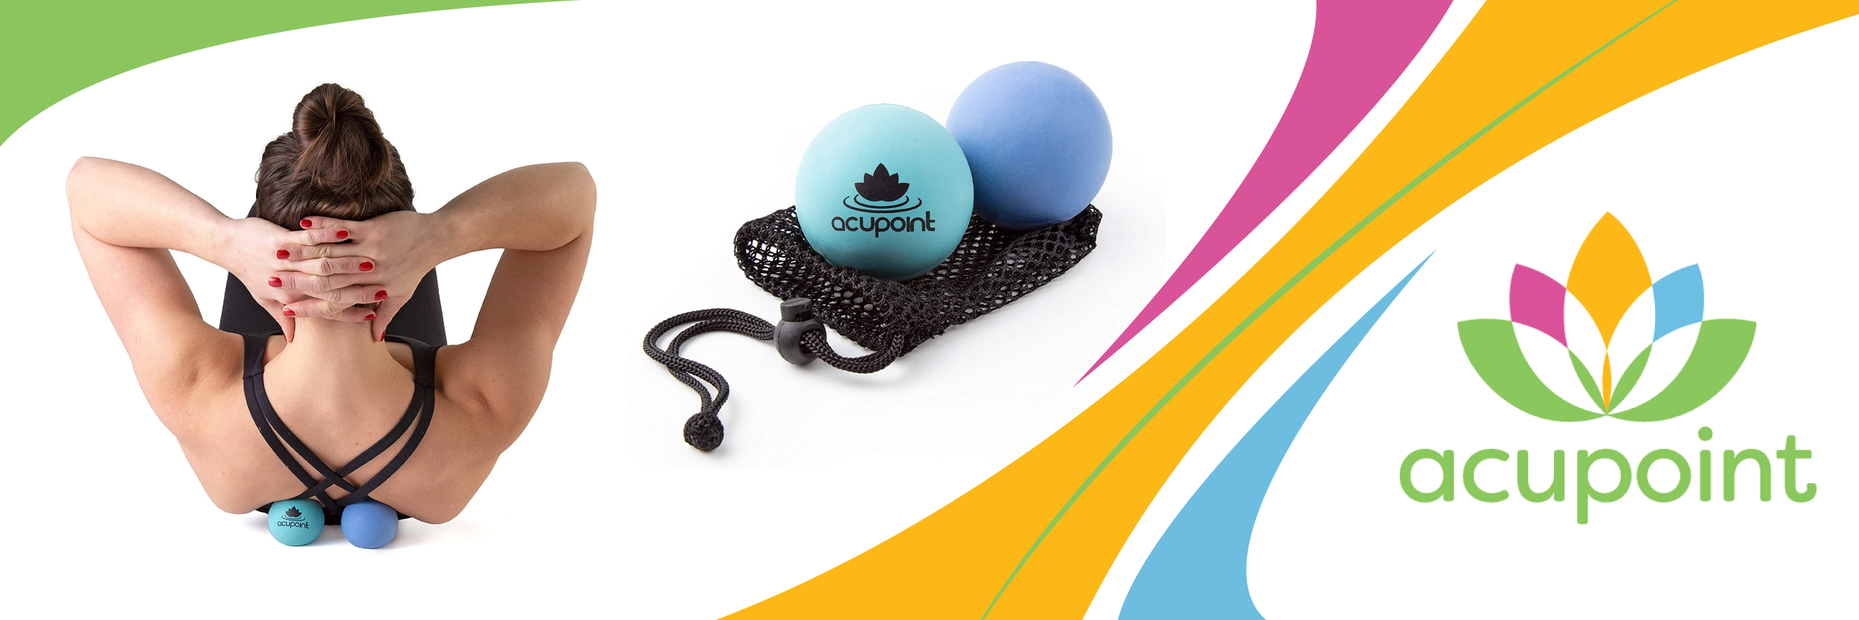 acupoint website banner - women using massage ball in exercise 